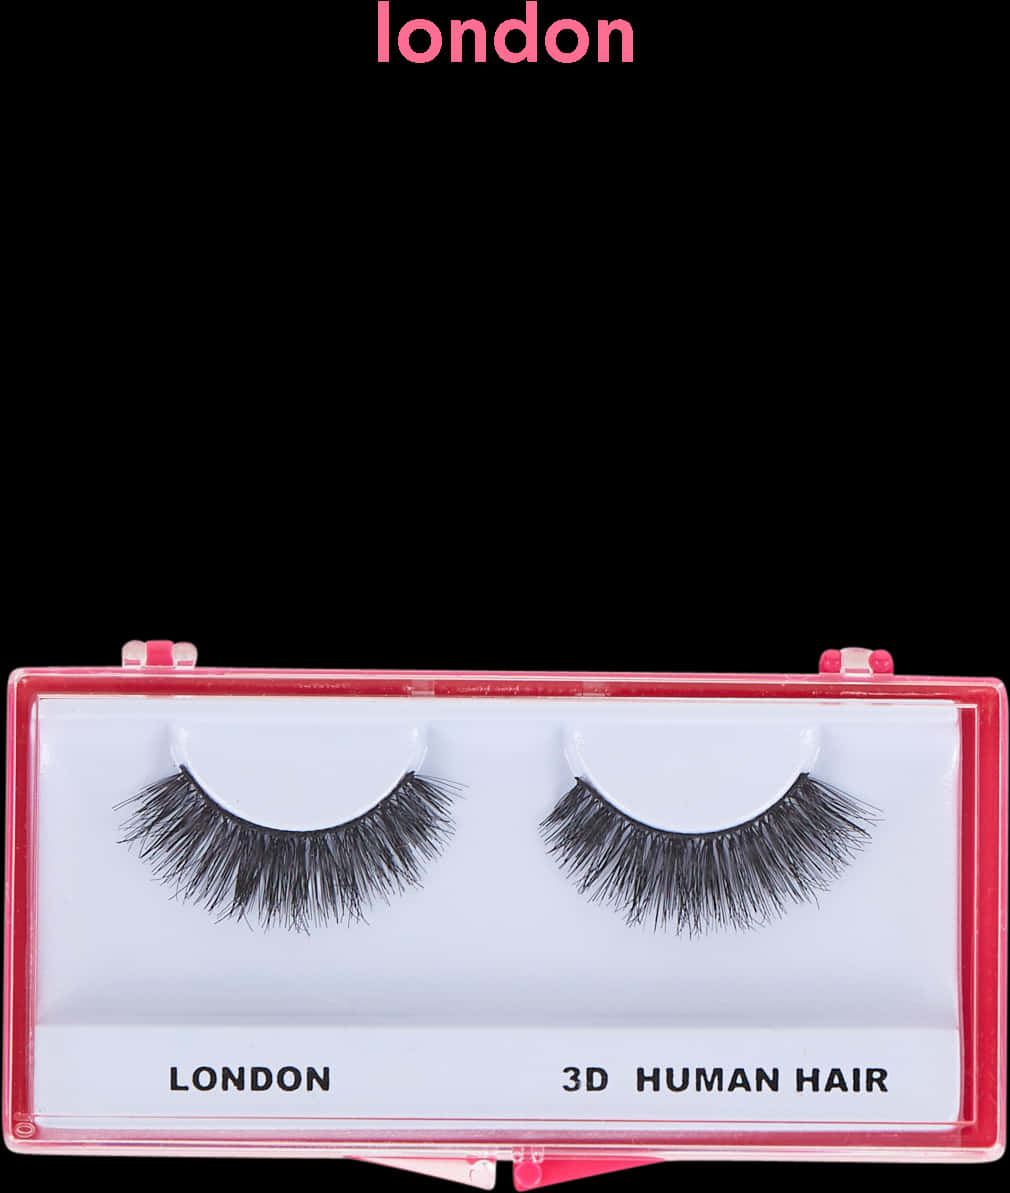 A Pair Of False Eyelashes In A Red Box